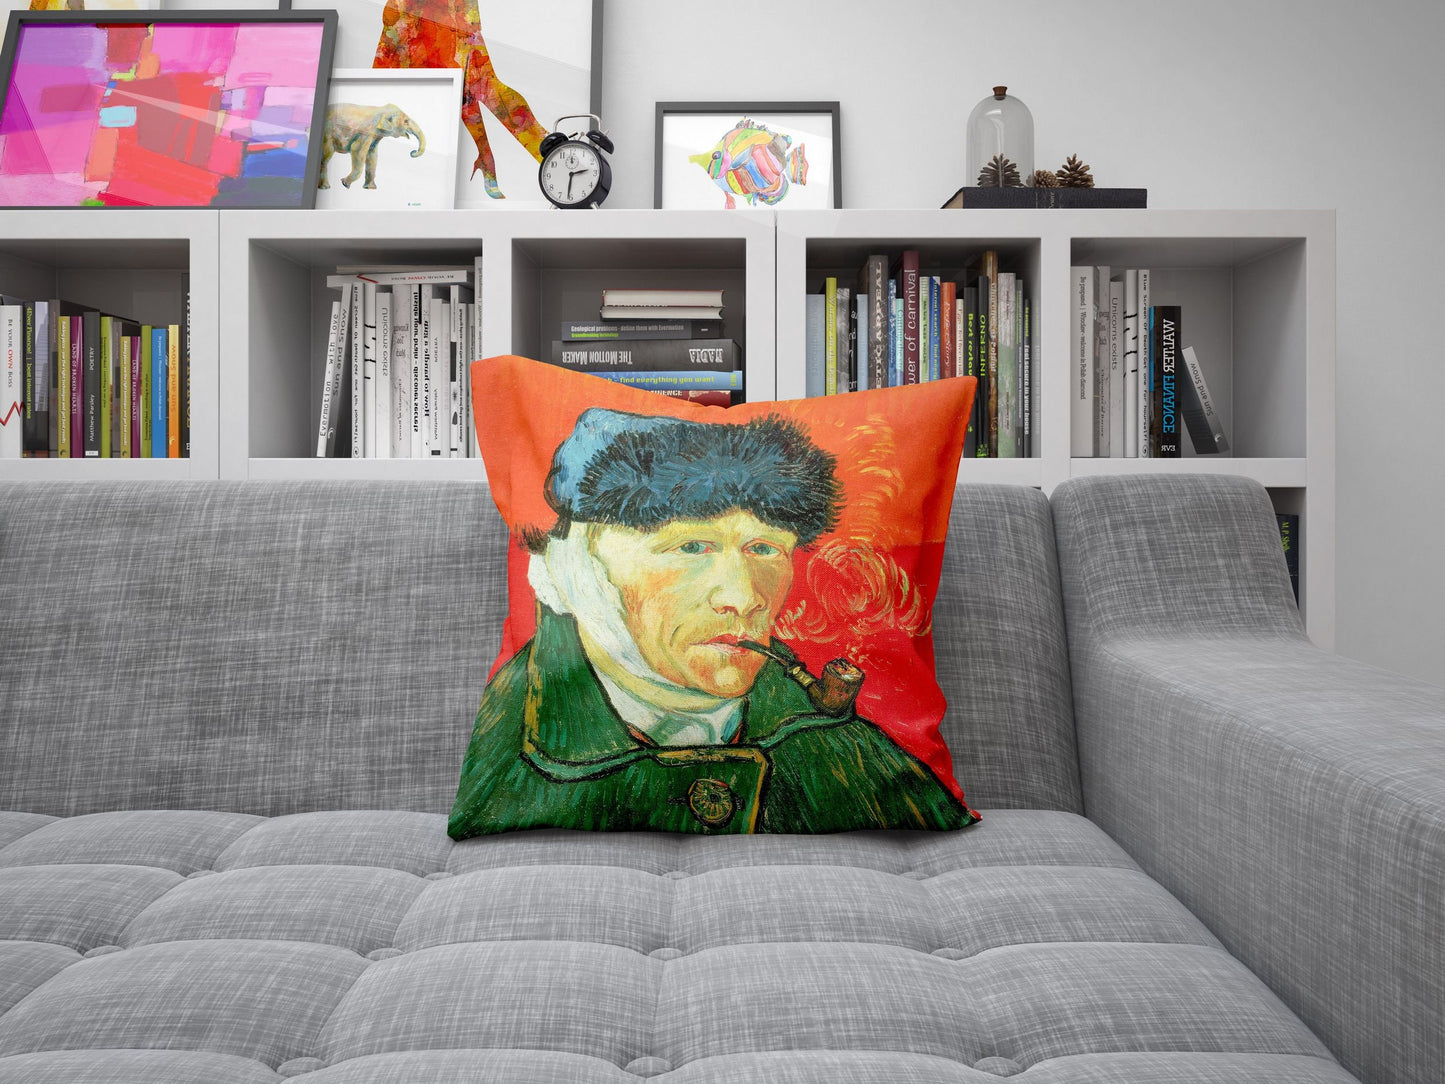 Vincent Van Gogh Famous Art Self-Portrait With Bandaged Ear And Pipe, Toss Pillow, Abstract Pillow, Art Pillow, 18 X 18 Pillow Covers